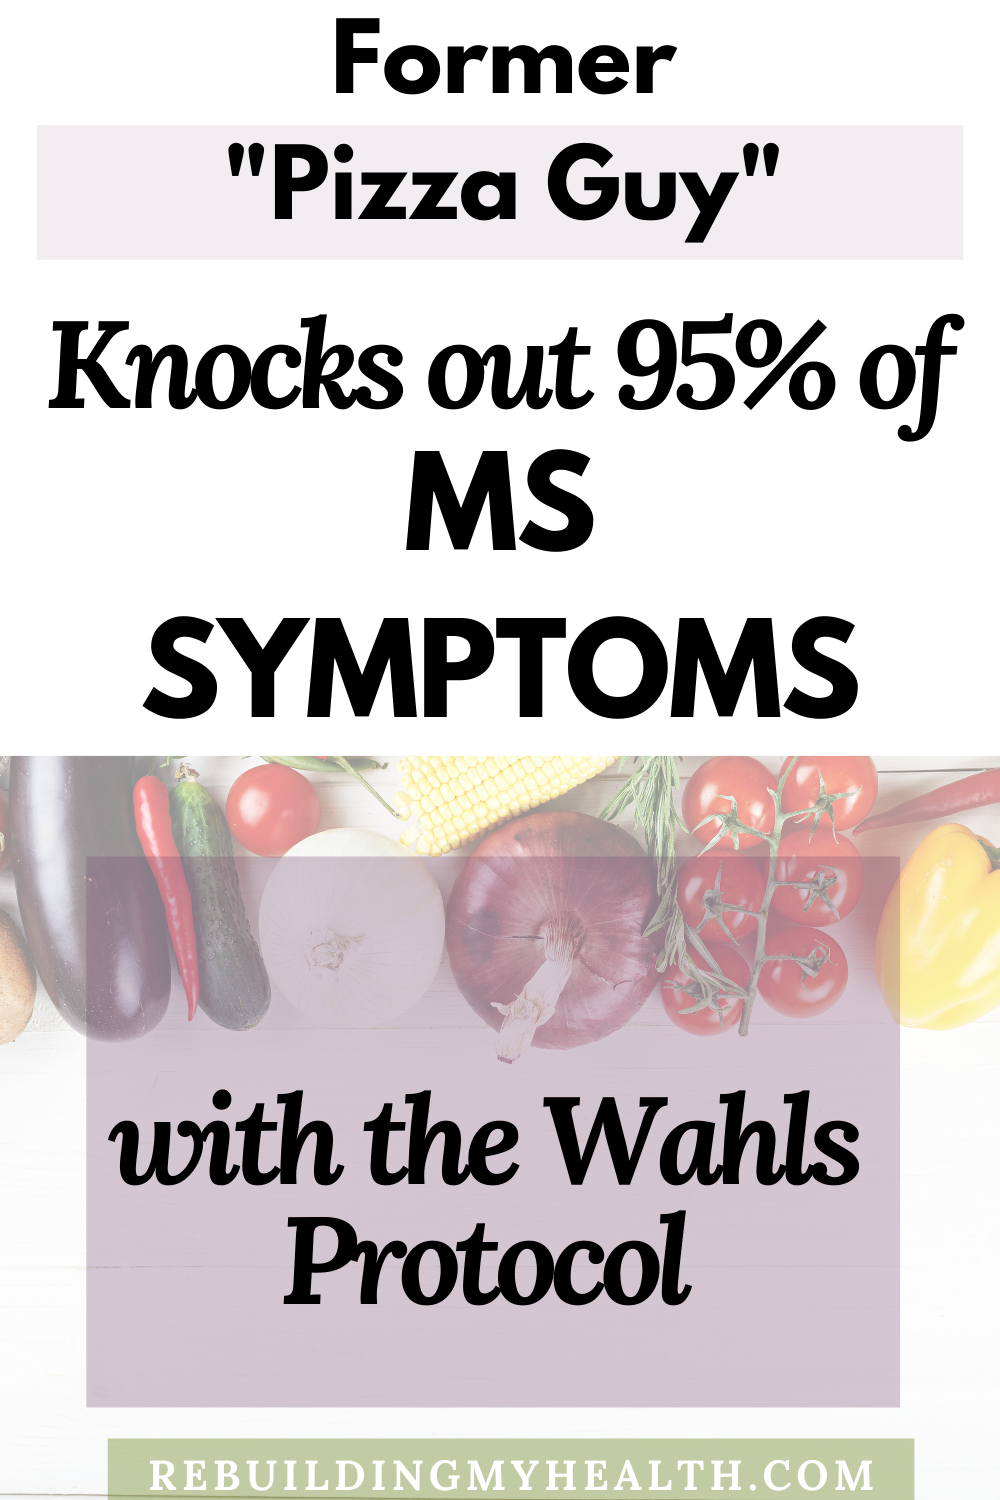 After Tony developed multiple sclerosis, he turned to lifestyle changes - including the Wahls Protocol - to reduce symptoms and prevent flares.